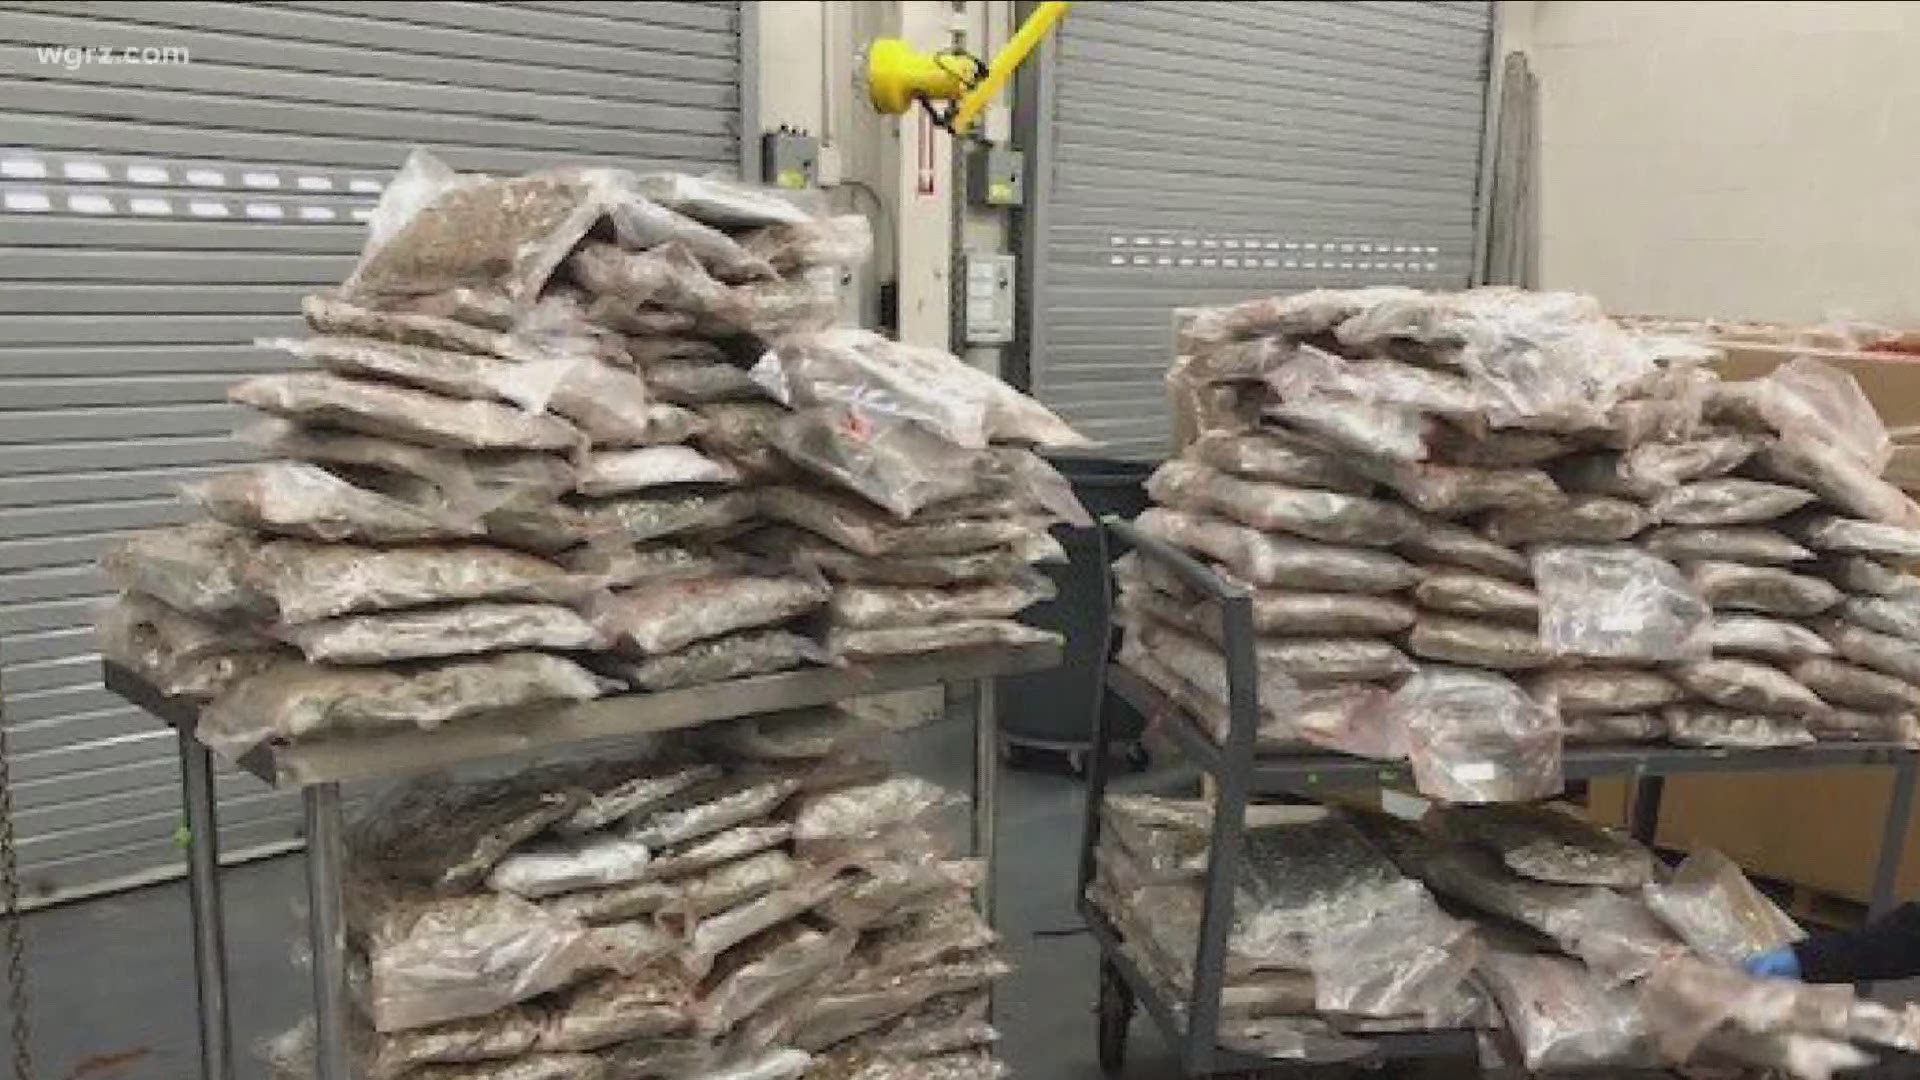 over 41,000 pounds of marijuana. that in and of itself is an increase of 11-hundred percent over the previous year